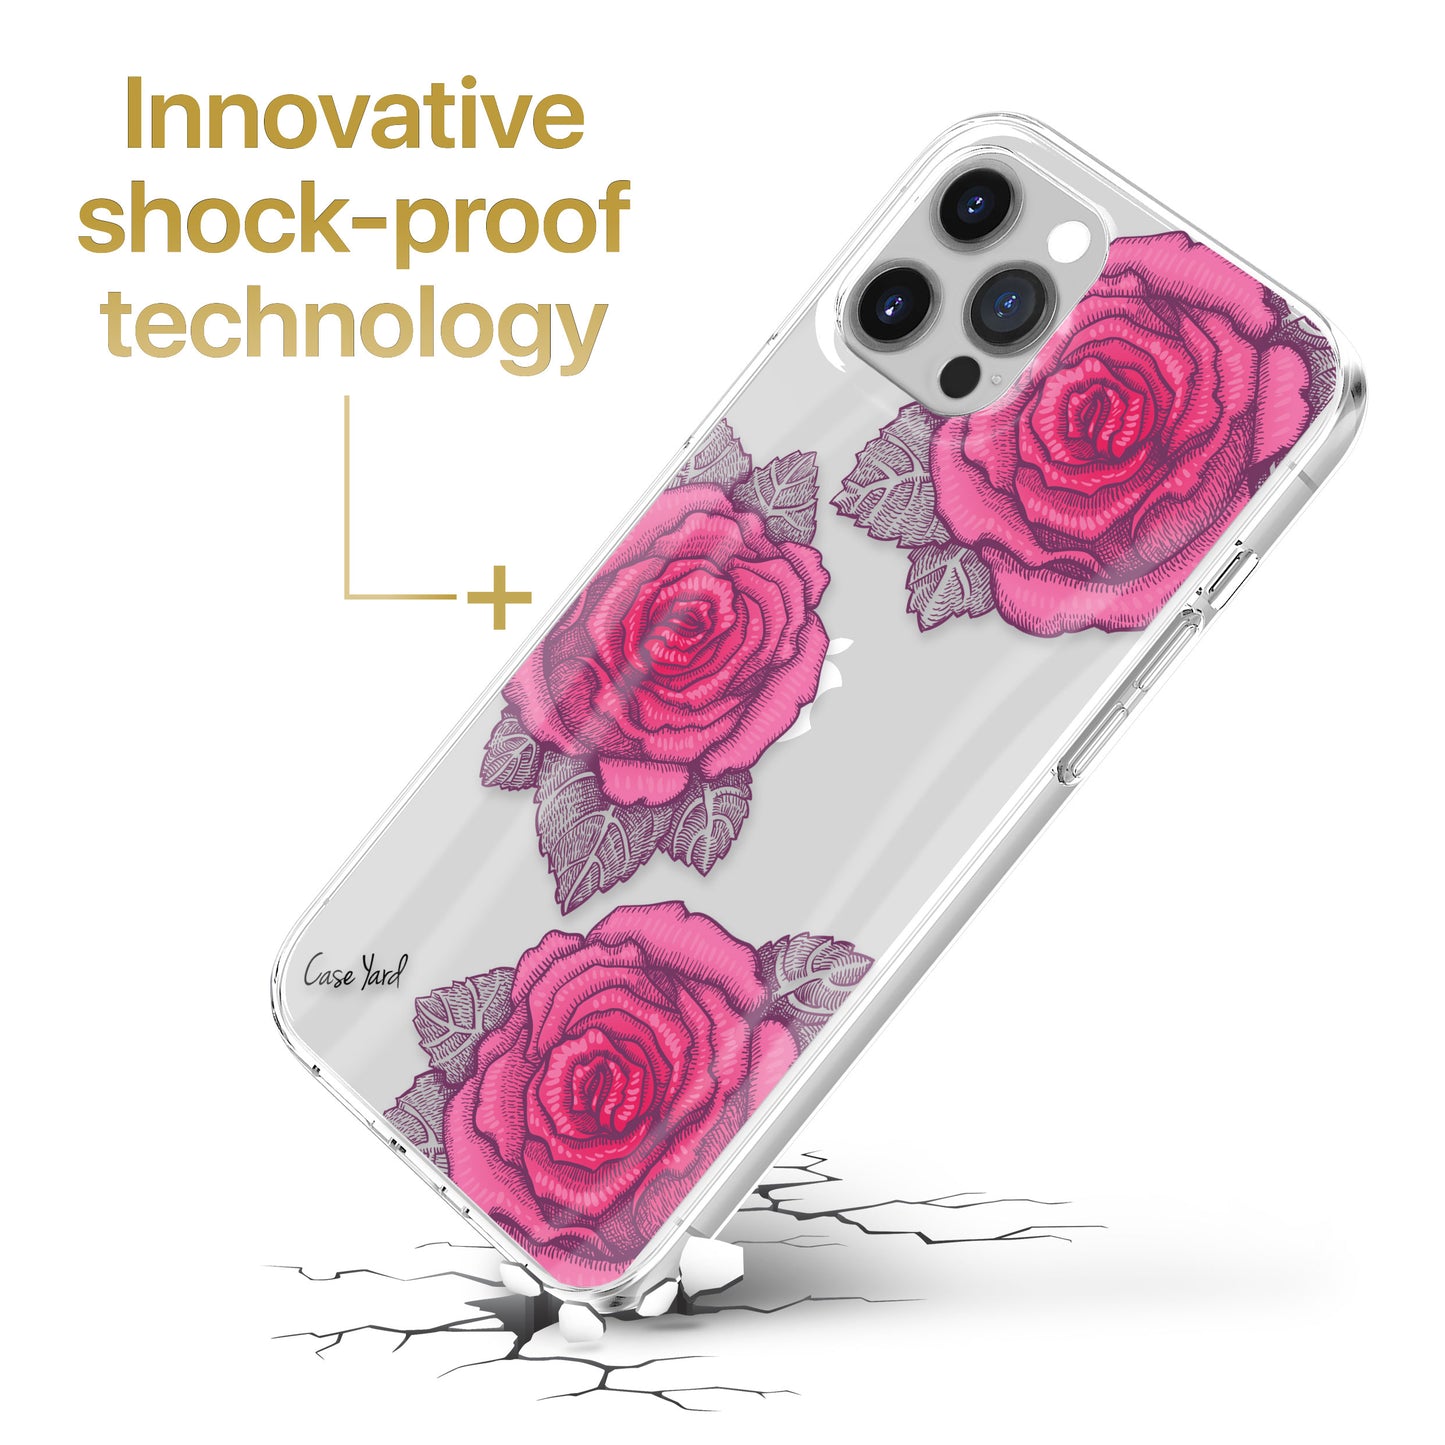 TPU Clear case with (Pink Roses Pen) Design for iPhone & Samsung Phones